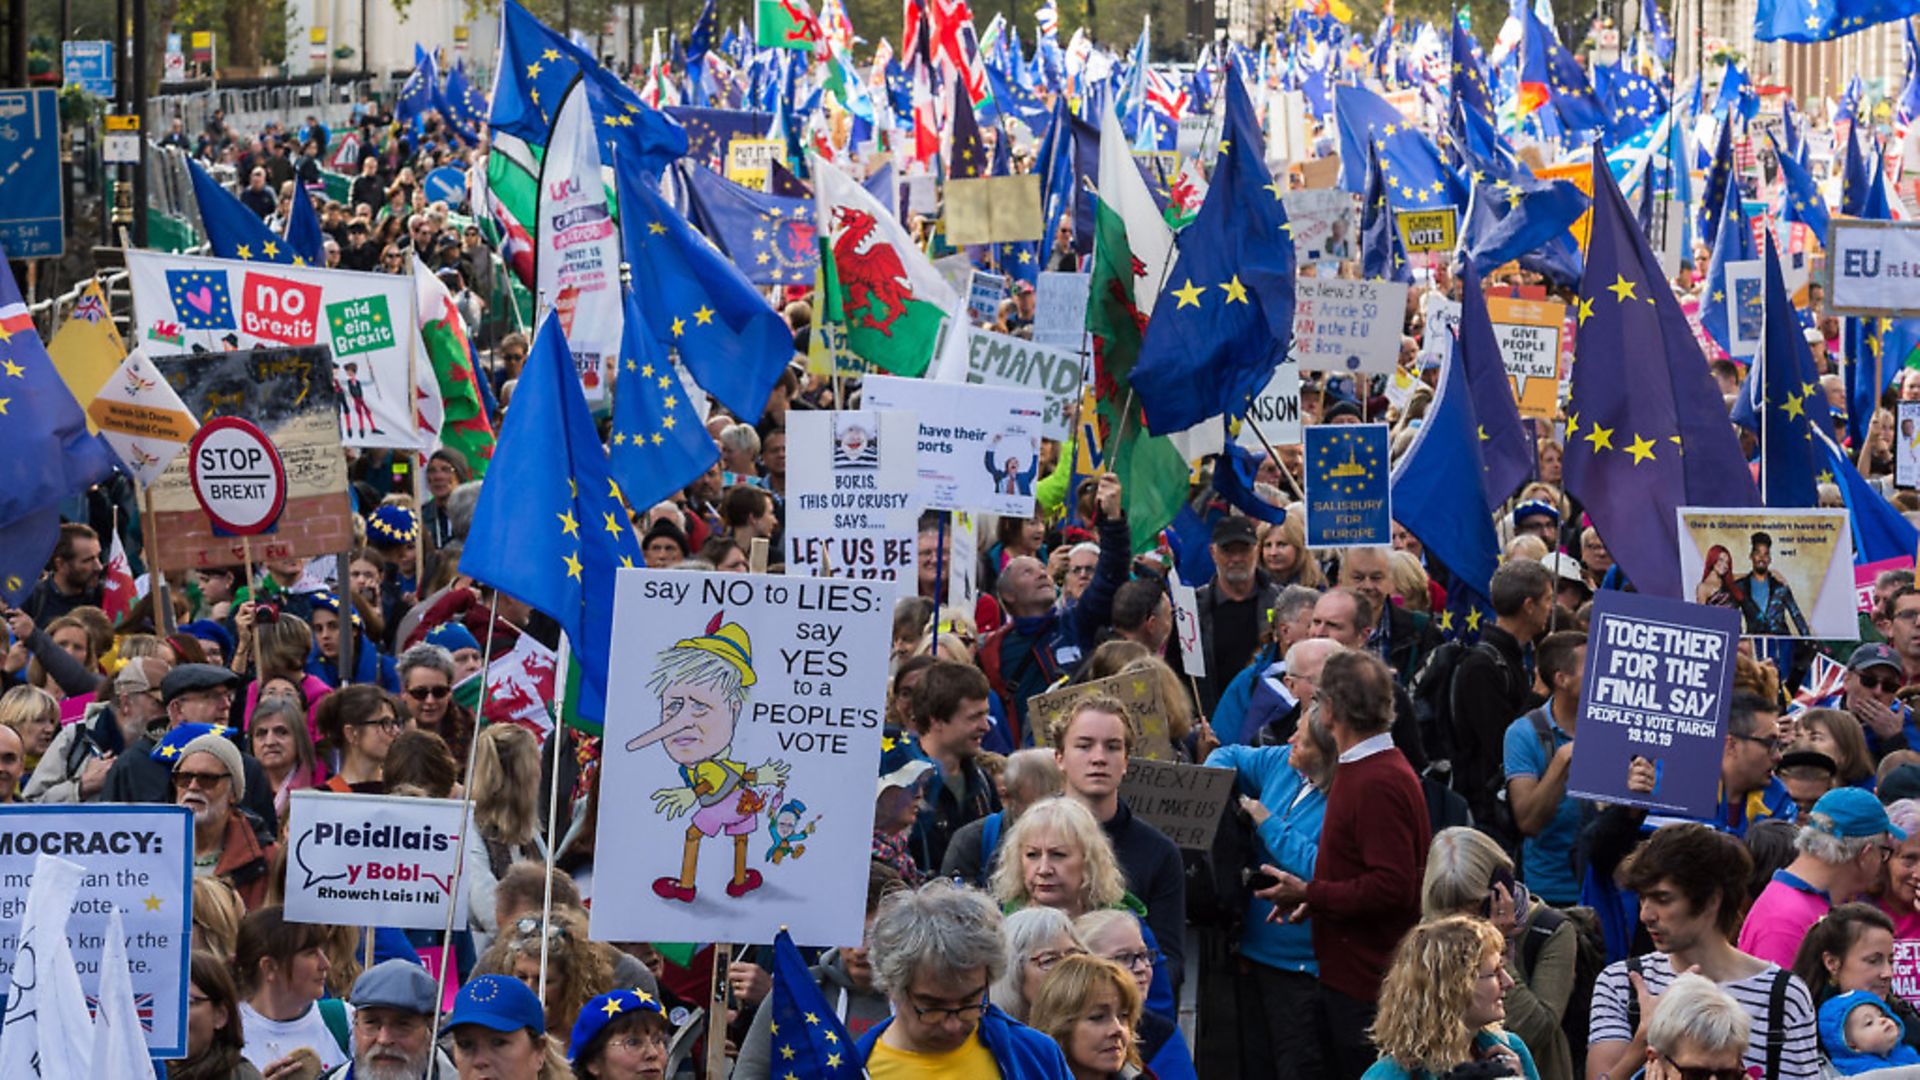 Hundreds of thousands of anti-Brexit protesters take part in 'Together for the Final Say' march through central London. (Photo by Wiktor Szymanowicz/NurPhoto via Getty Images) - Credit: NurPhoto via Getty Images